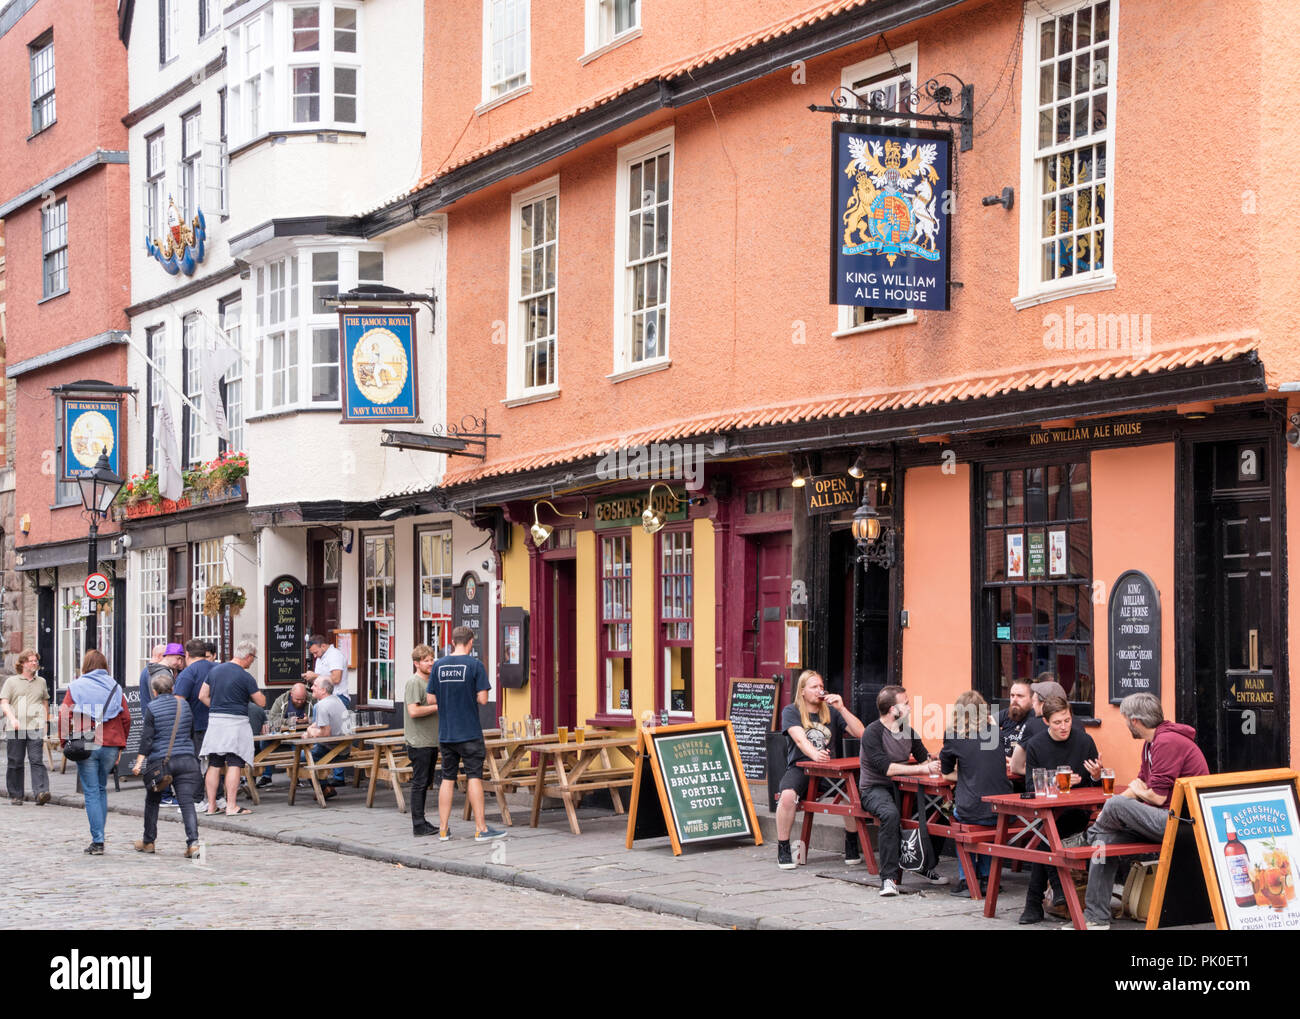 People relaxing in city of Bristol at the King William Ale House, Bristol England, UK Stock Photo